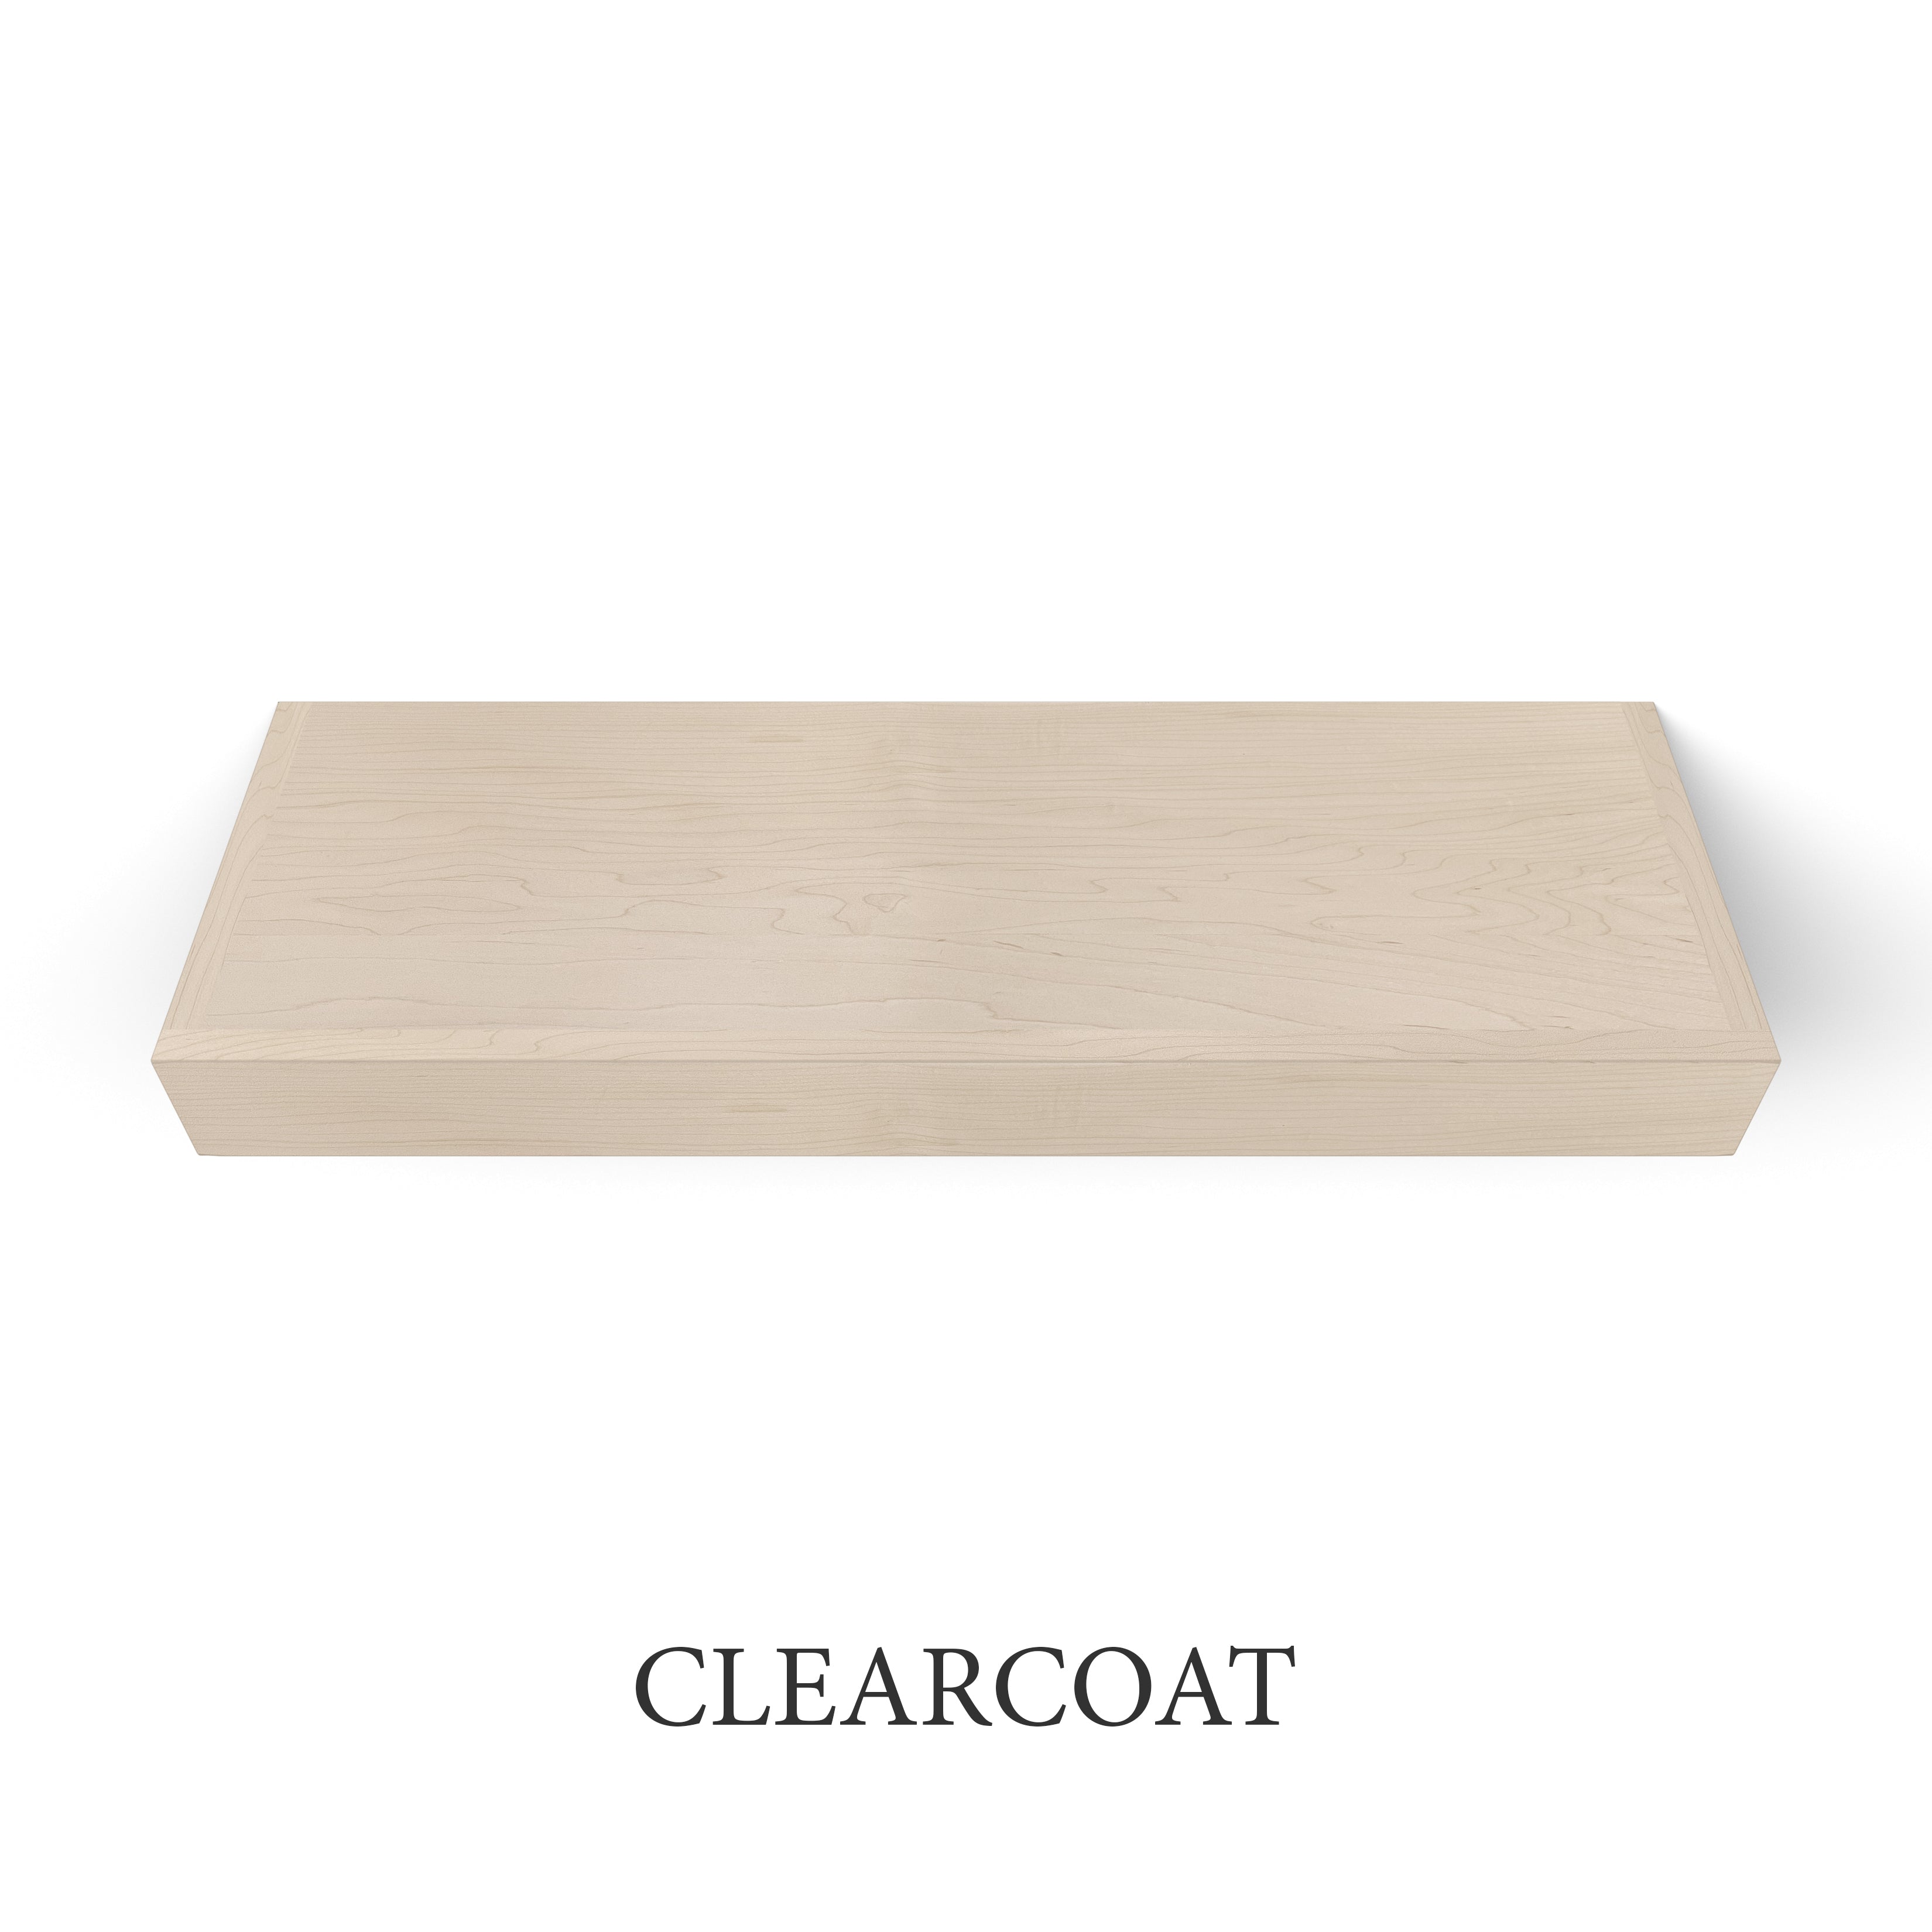 clearcoat Maple 3 Inch Thick Floating Shelf